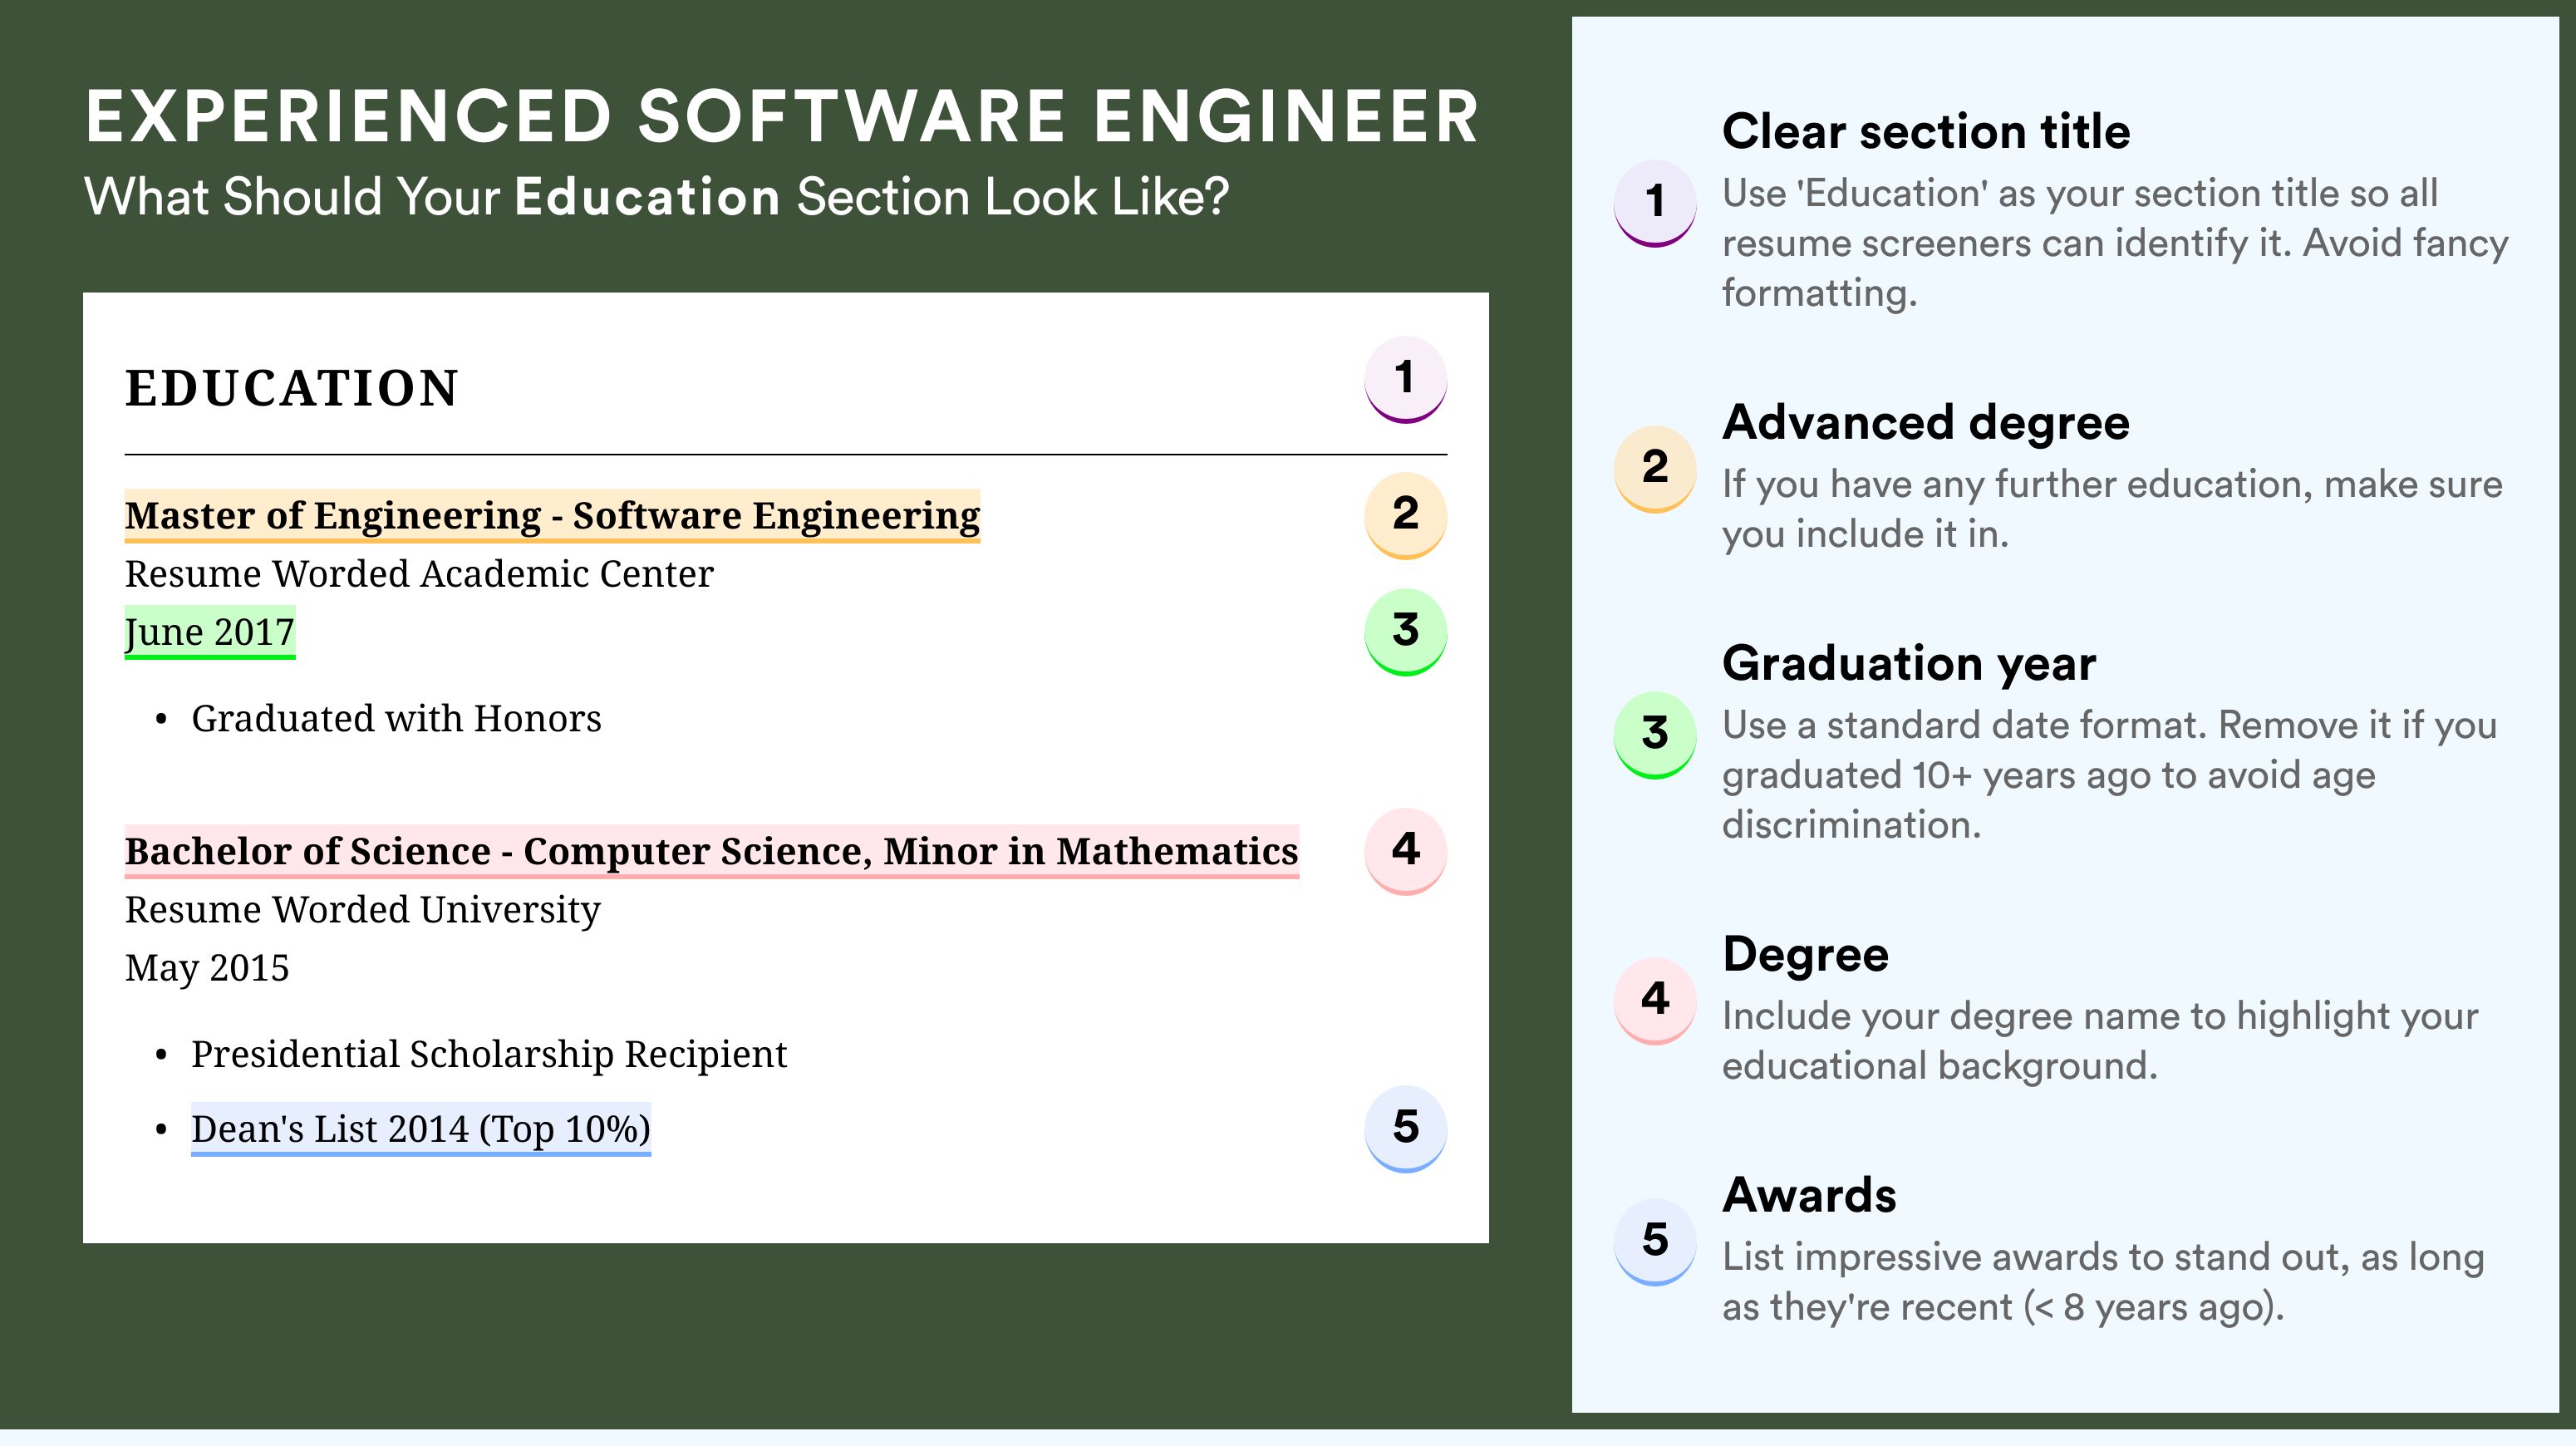 How To Write An Education Section - Experienced Software Engineer Roles